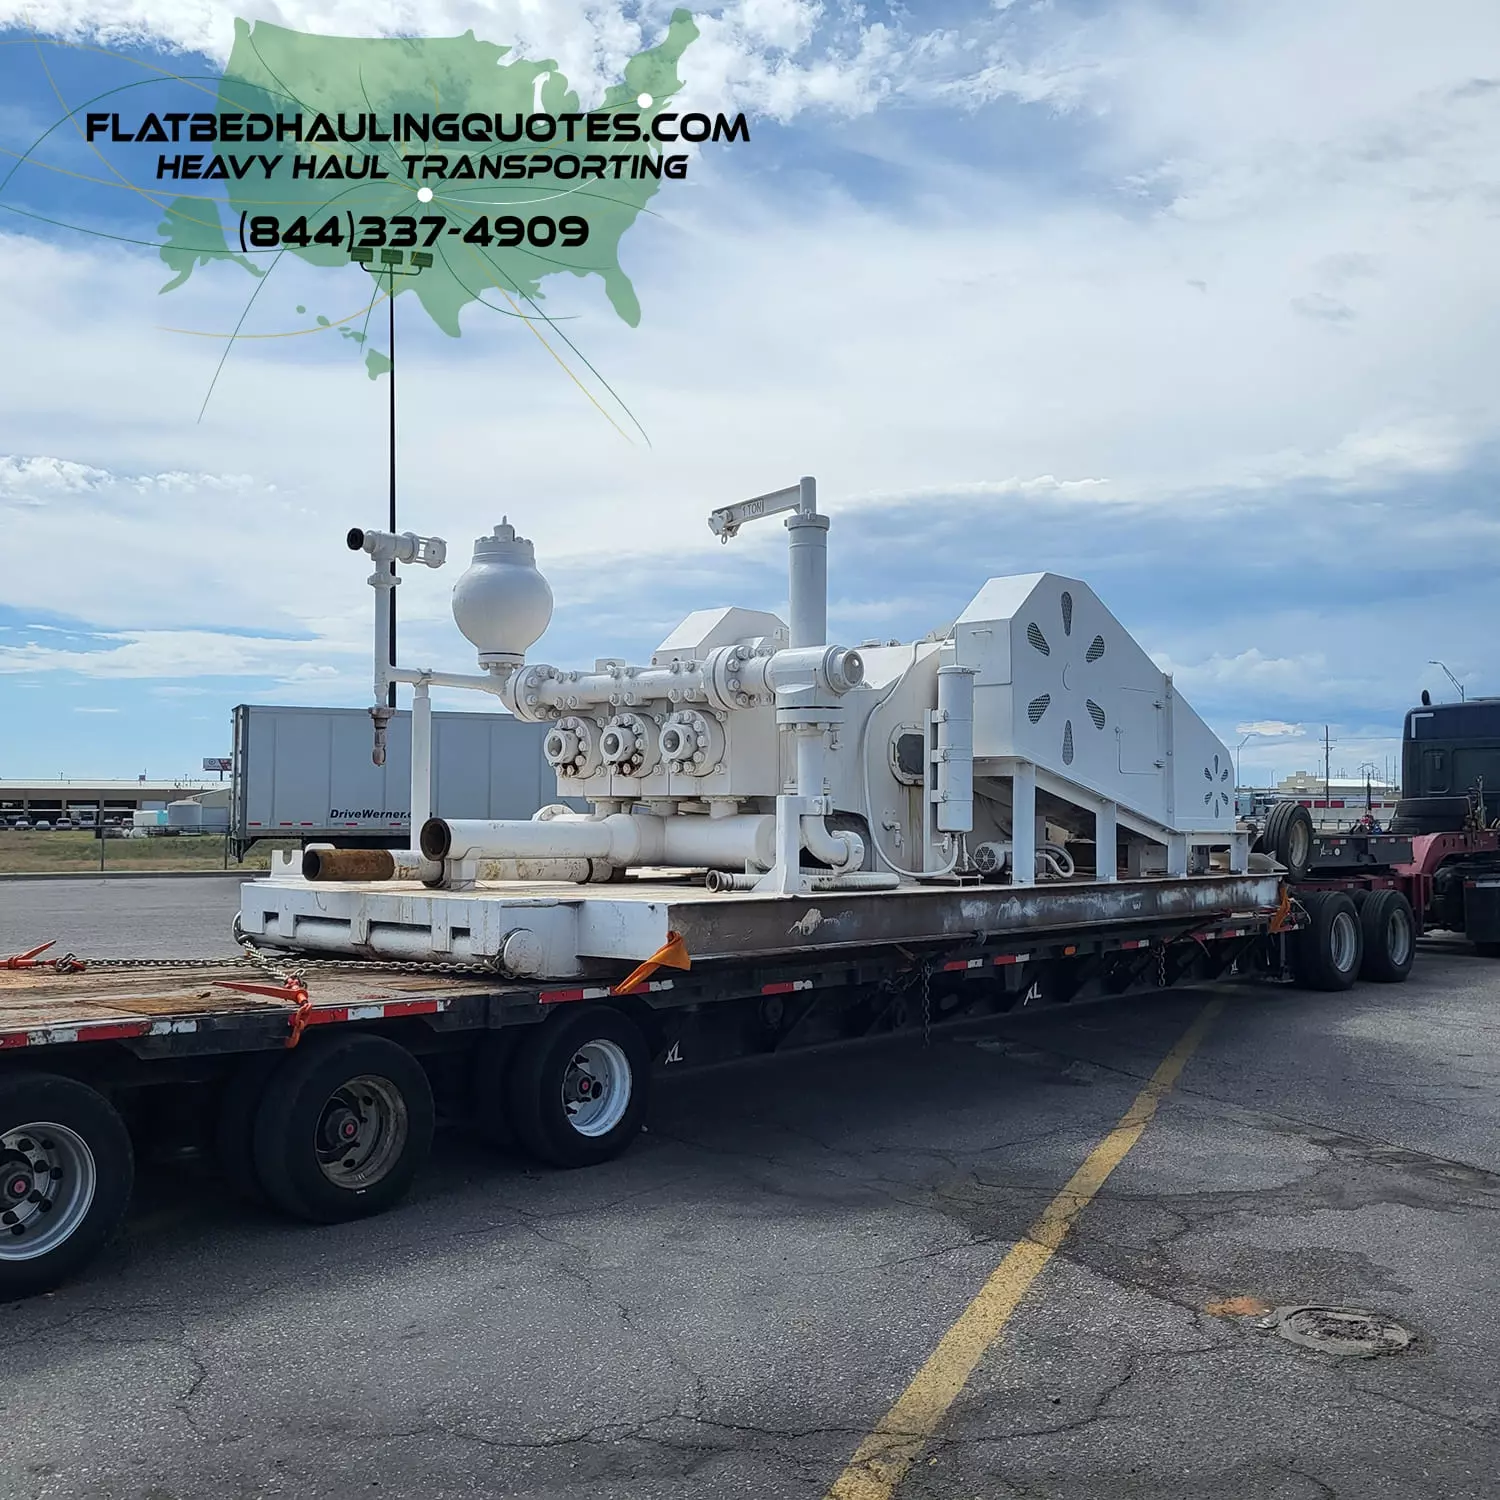 Heavy Equipment Transporters, Heavy Equipment Hauling Services, Flatbed Trucking Companies, Flatbed Hauling Companies, Heavy Haulers